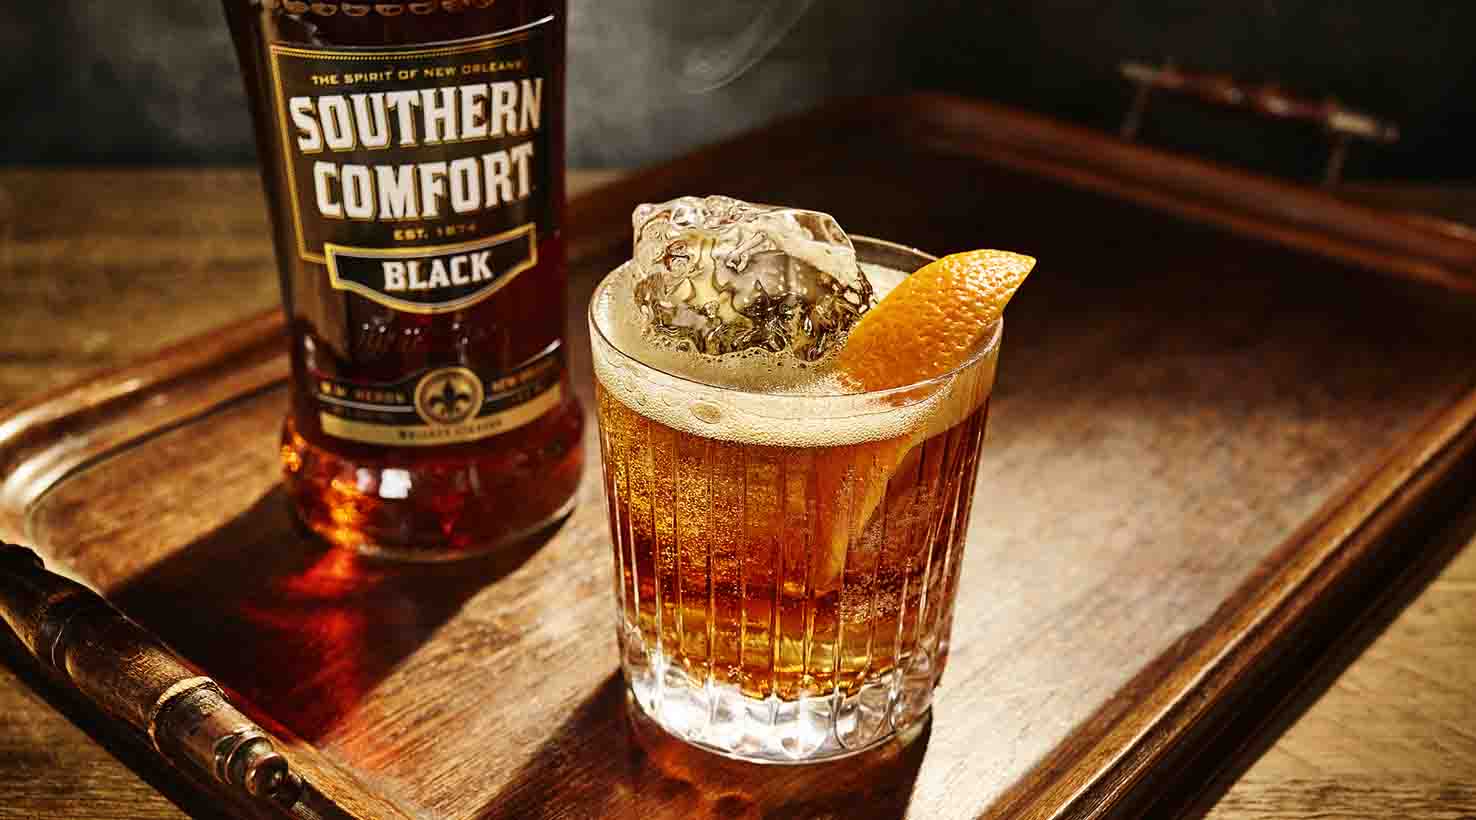 Hi-Spirits Ireland expects the bolder profile of Southern Comfort Black to have its strongest appeal to men who are seeking out American whiskey.